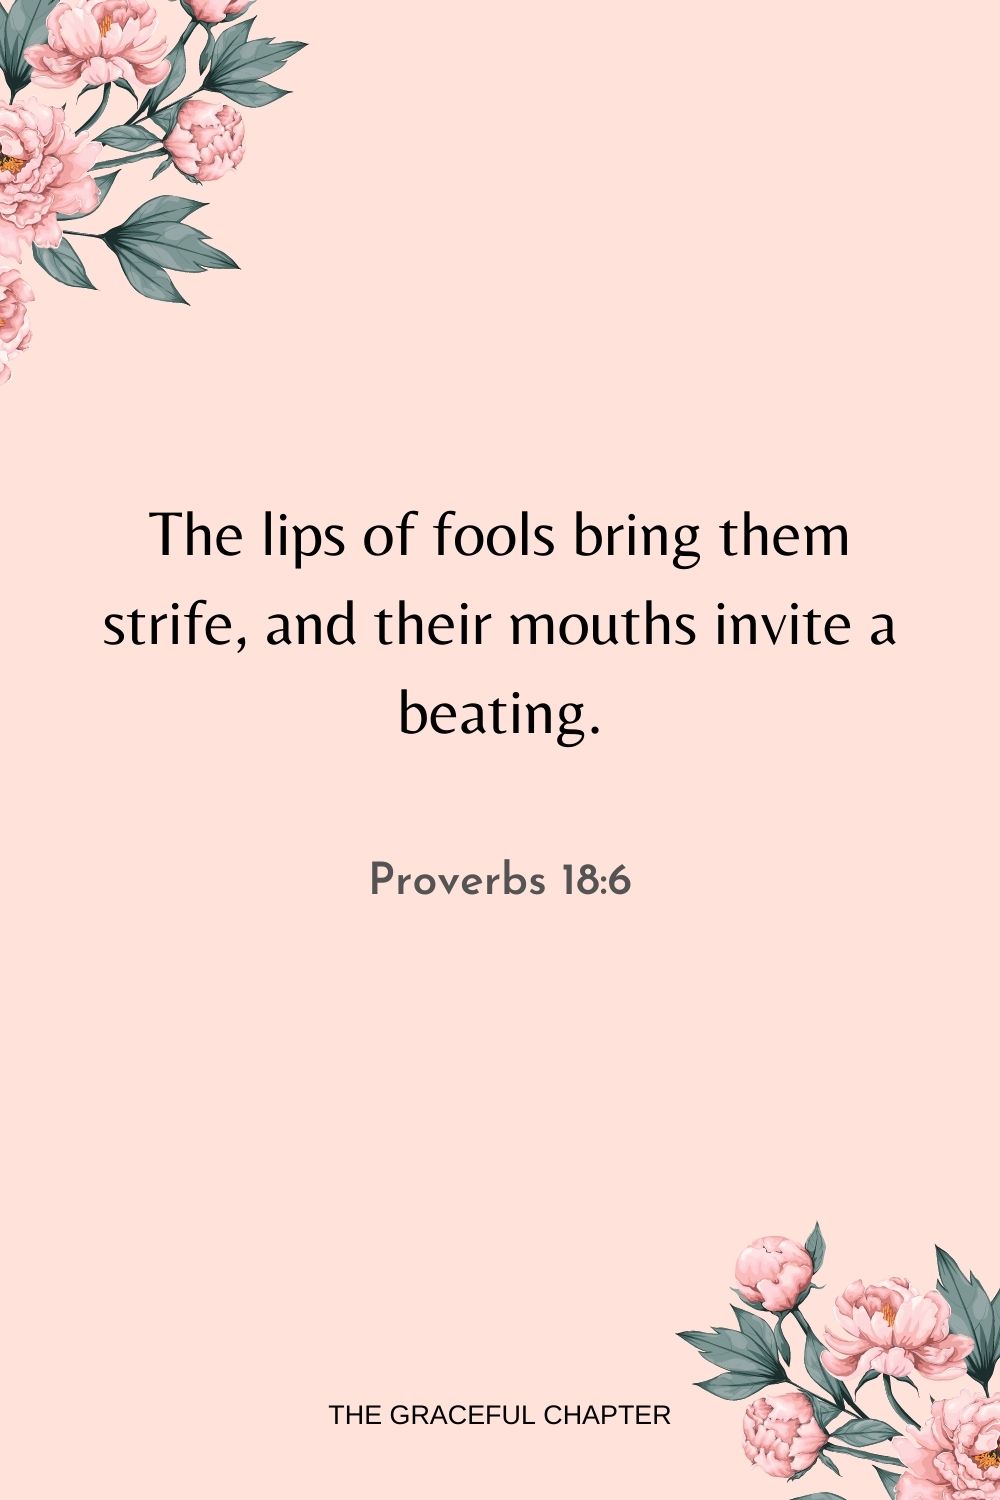 The lips of fools bring them strife, and their mouths invite a beating. Proverbs 18:6